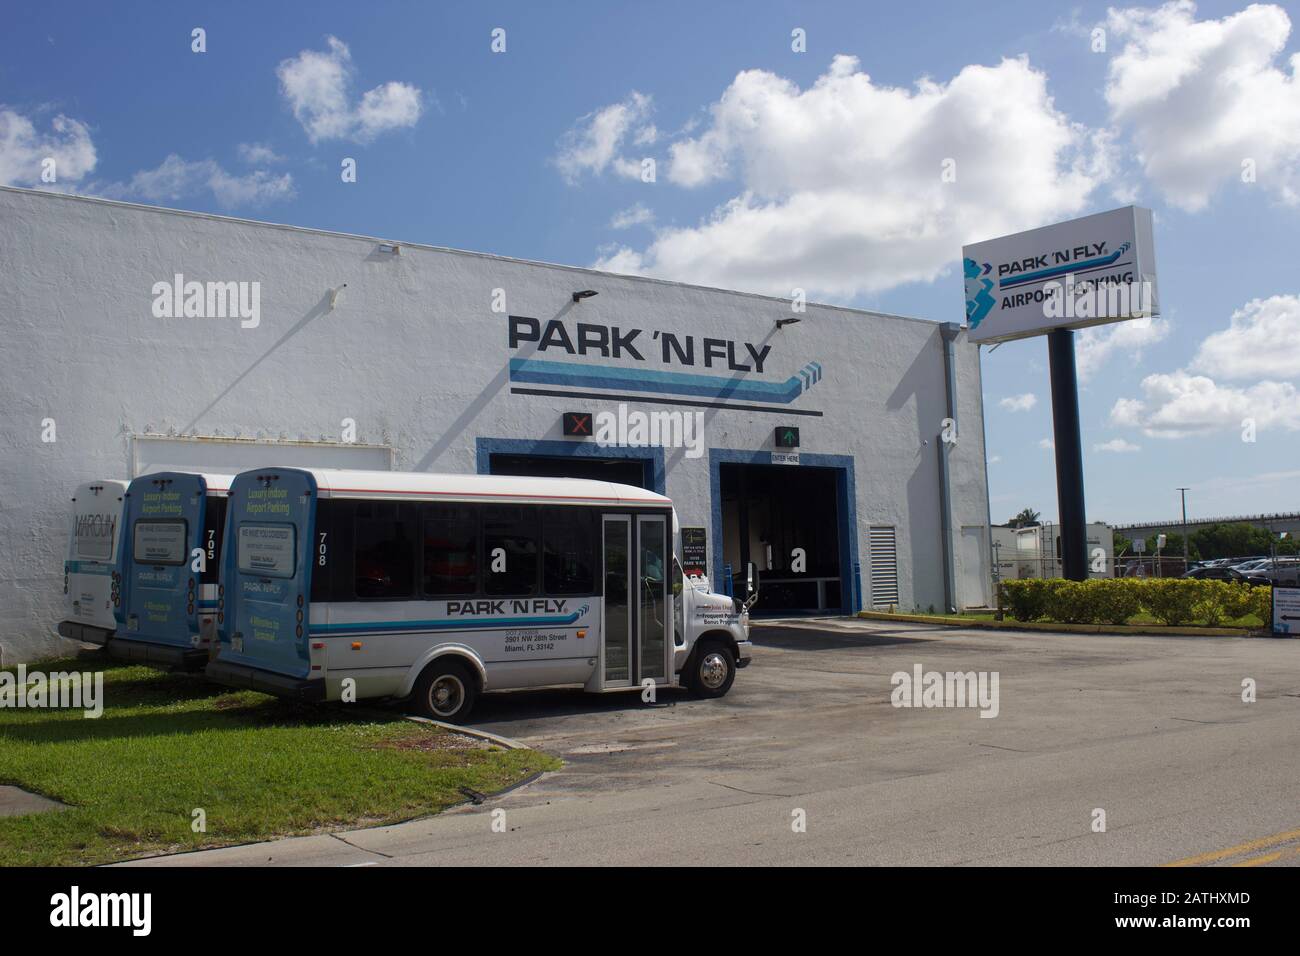 Miami Florida August 17,2019- Park 'N Fly is an off-airport parking operator in the United States with an Internet-based reservation system. Stock Photo